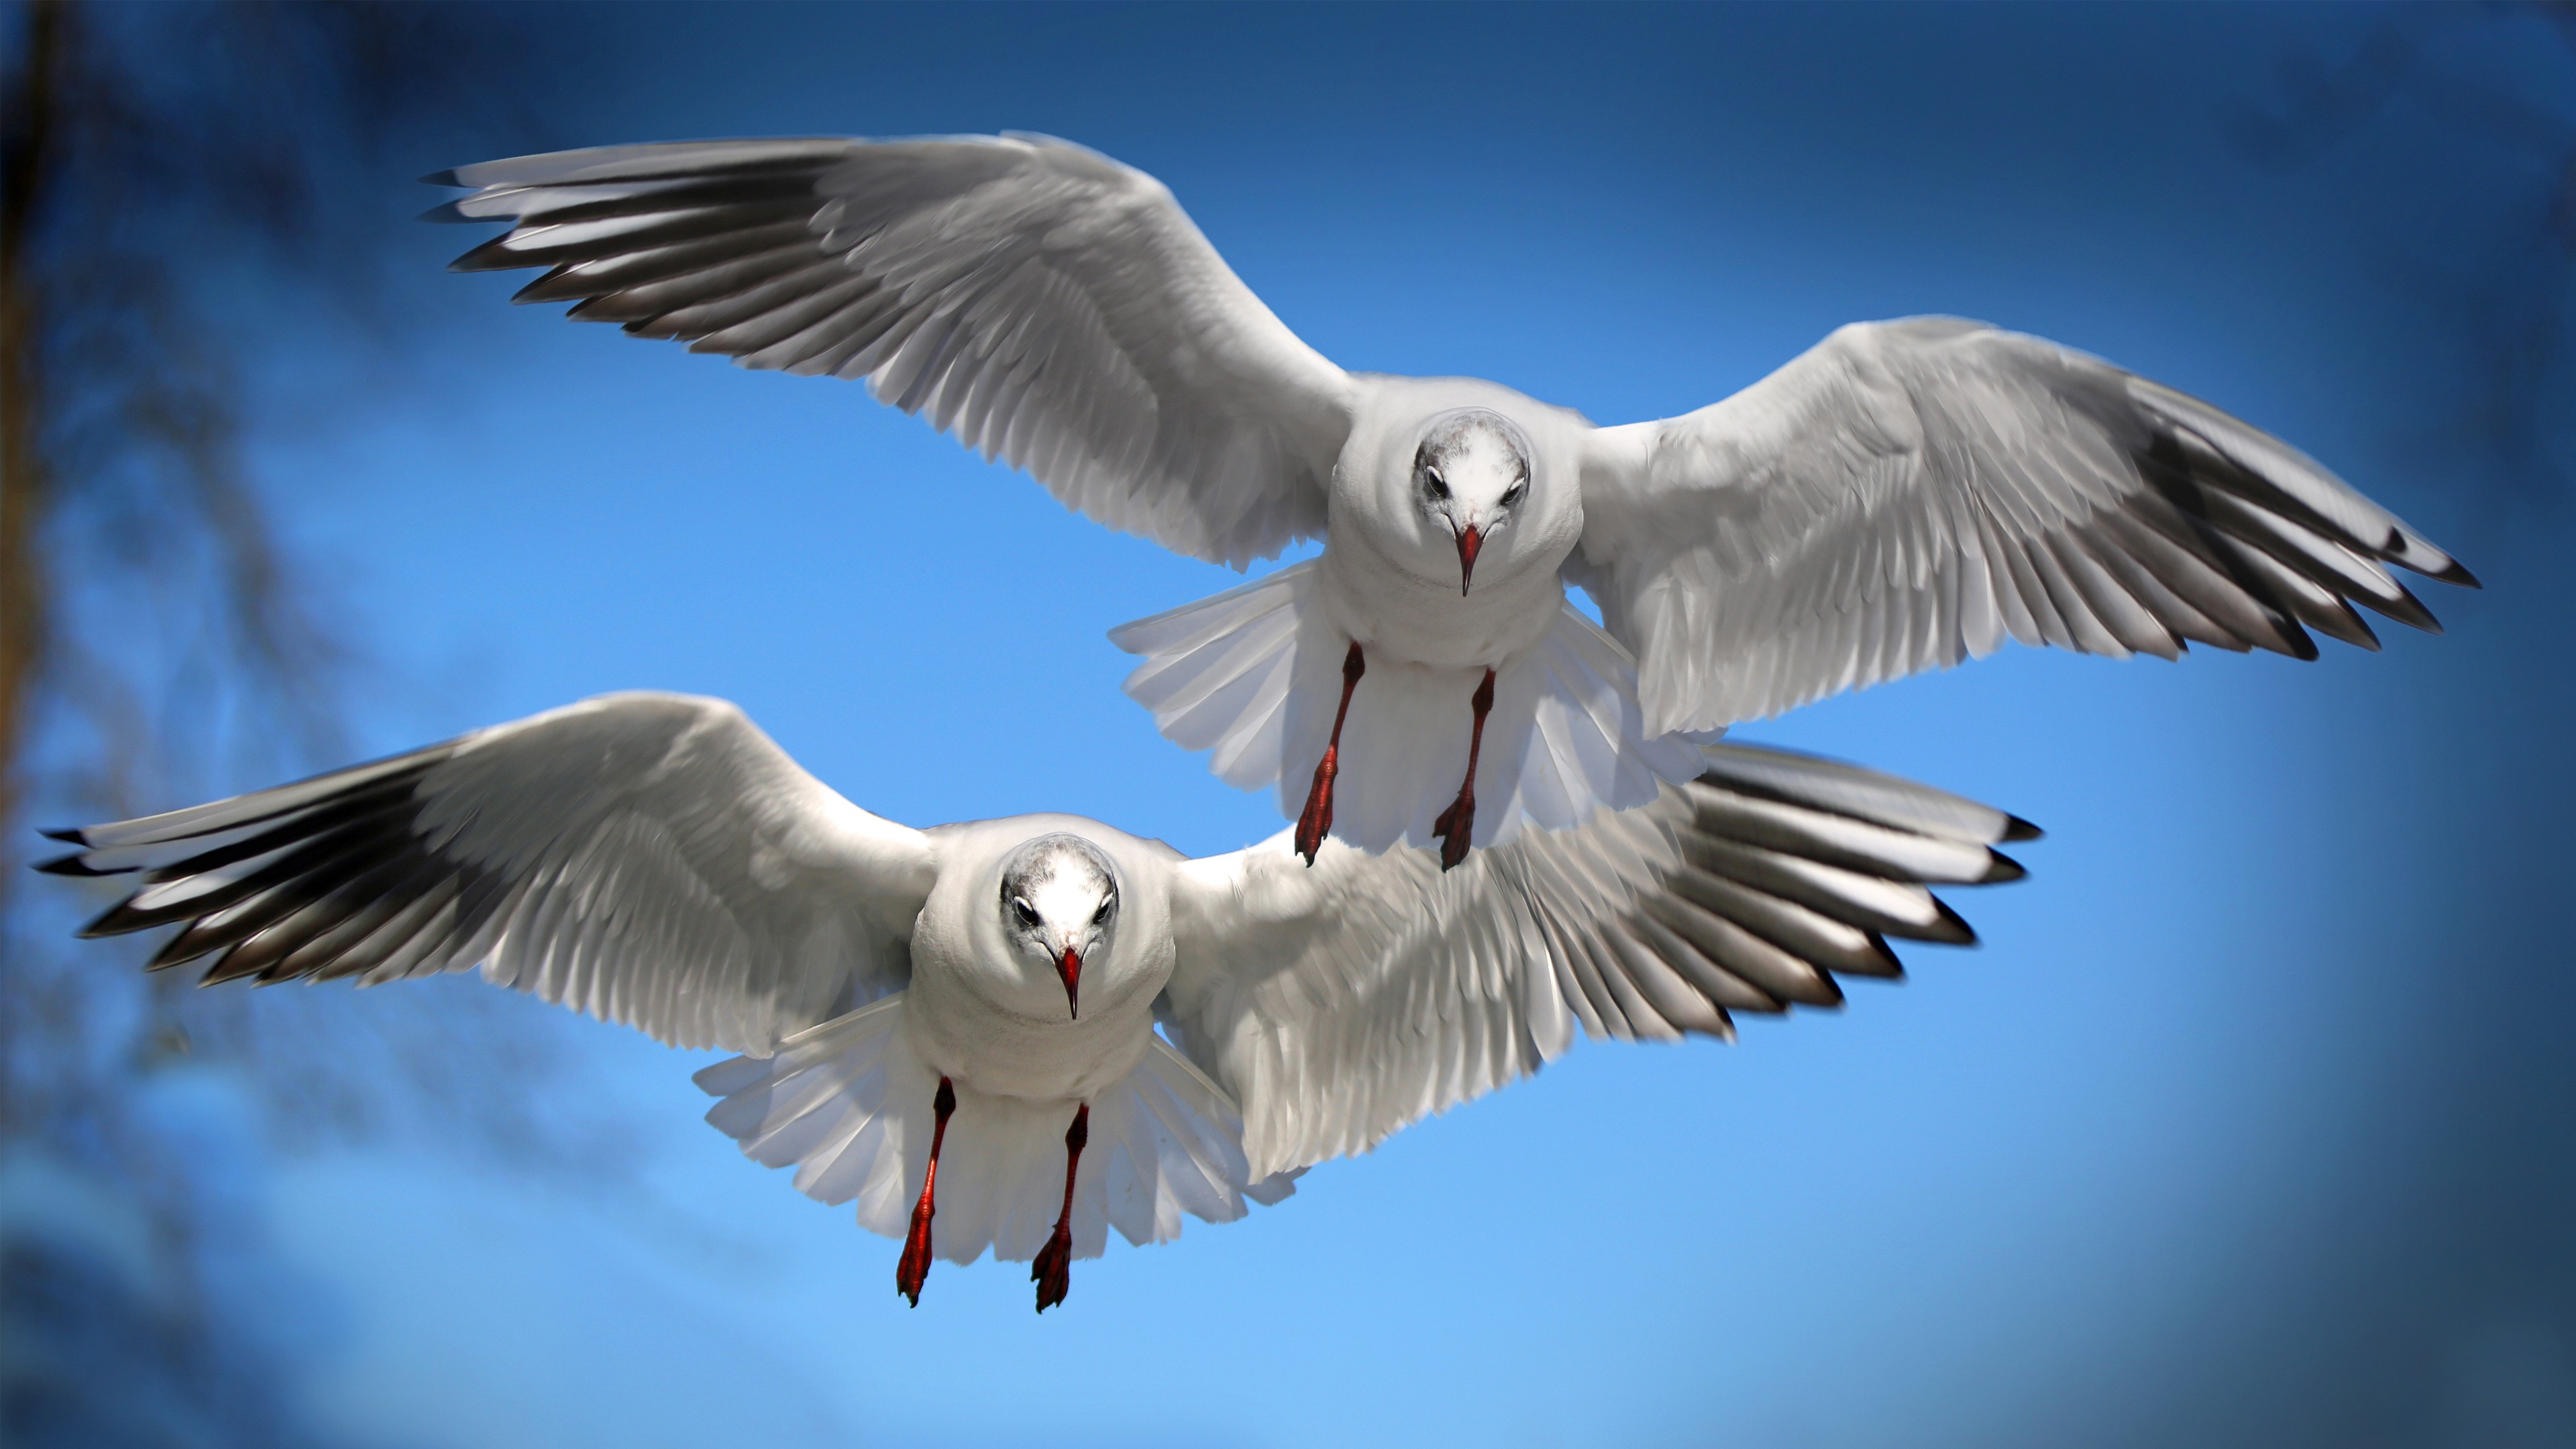 General 3840x2160 birds seagulls animals flying blue wings